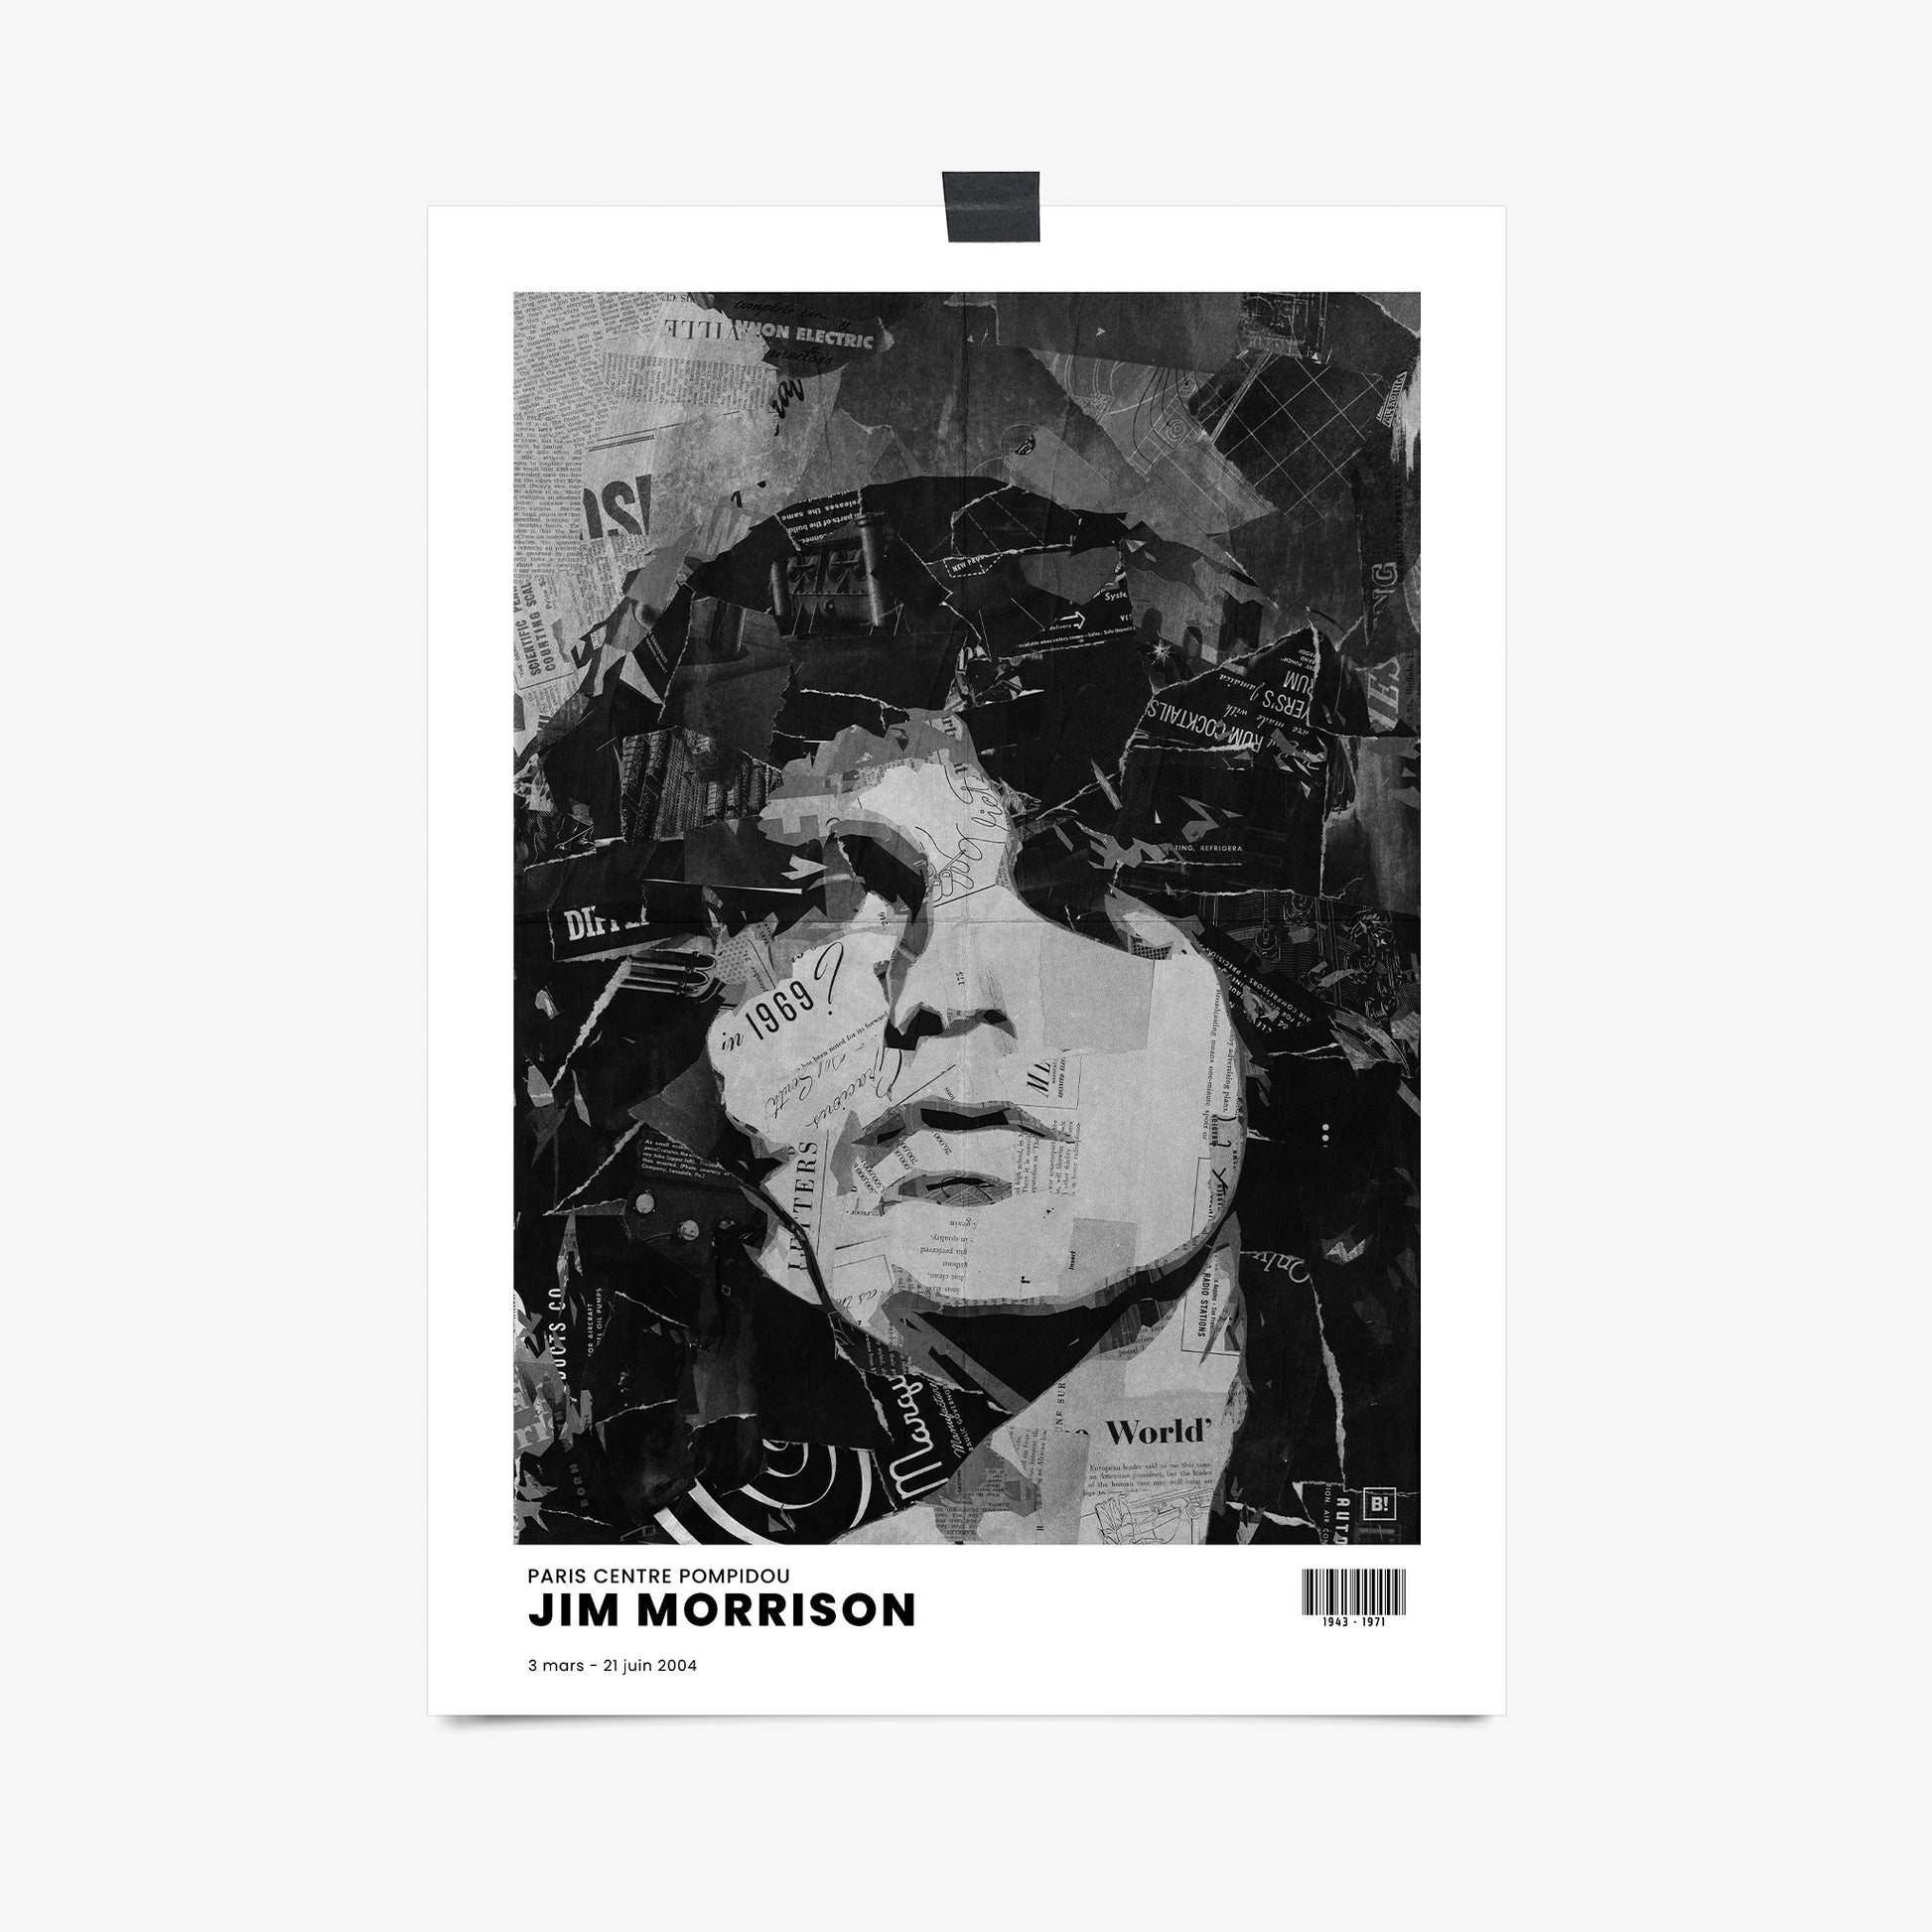 Be inspired by Iconic Jim Morrison Paris Centre Pompidou Exhibition Art Print. This artwork is printed using giclée on archival acid-free paper, capturing its timeless beauty in every detail.